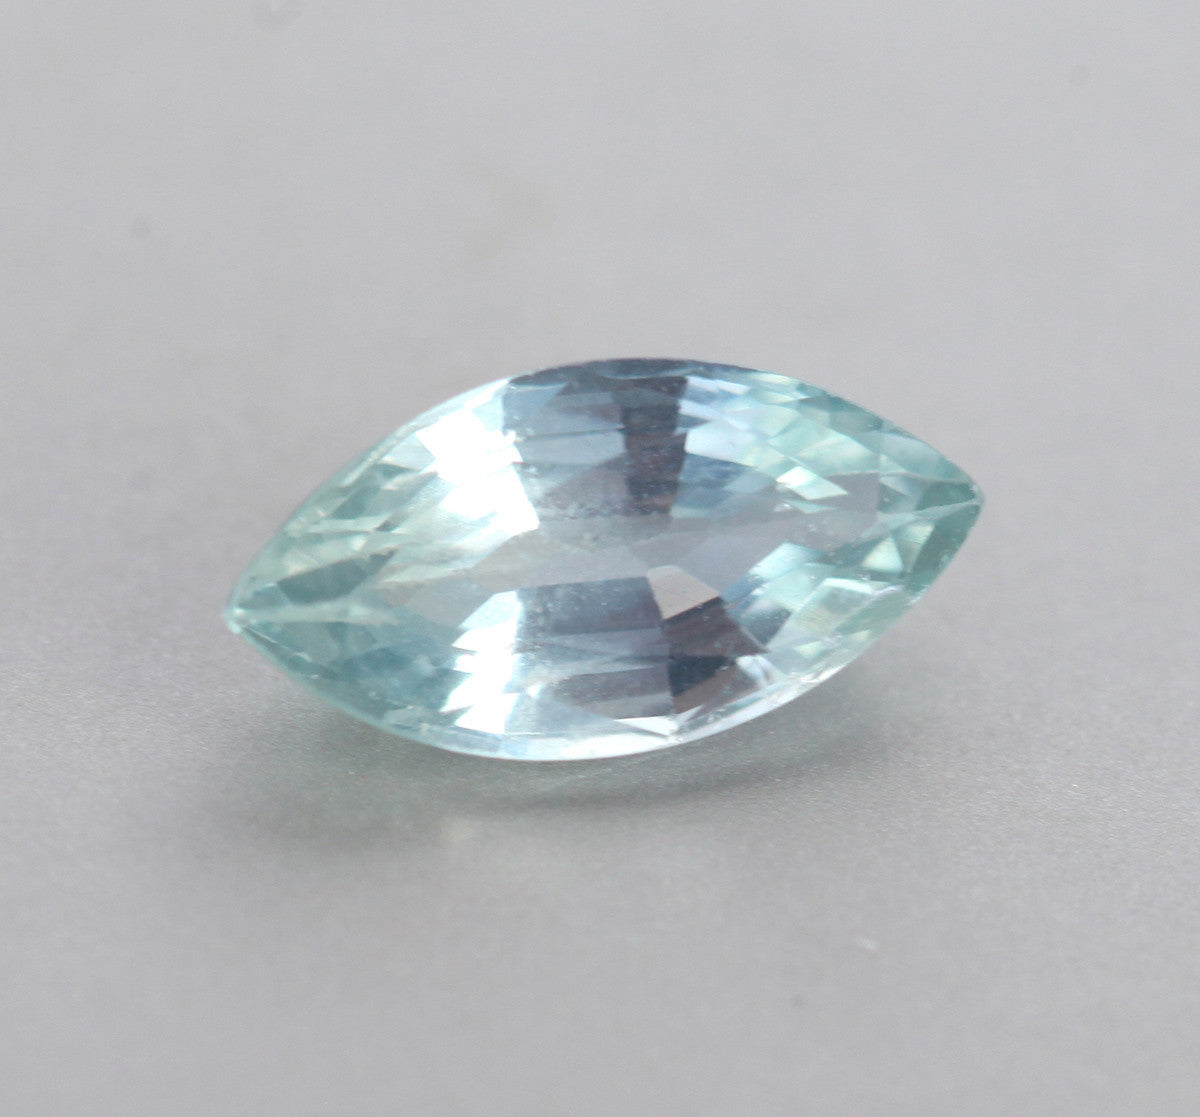 Loose marquise-cut mint green sapphire